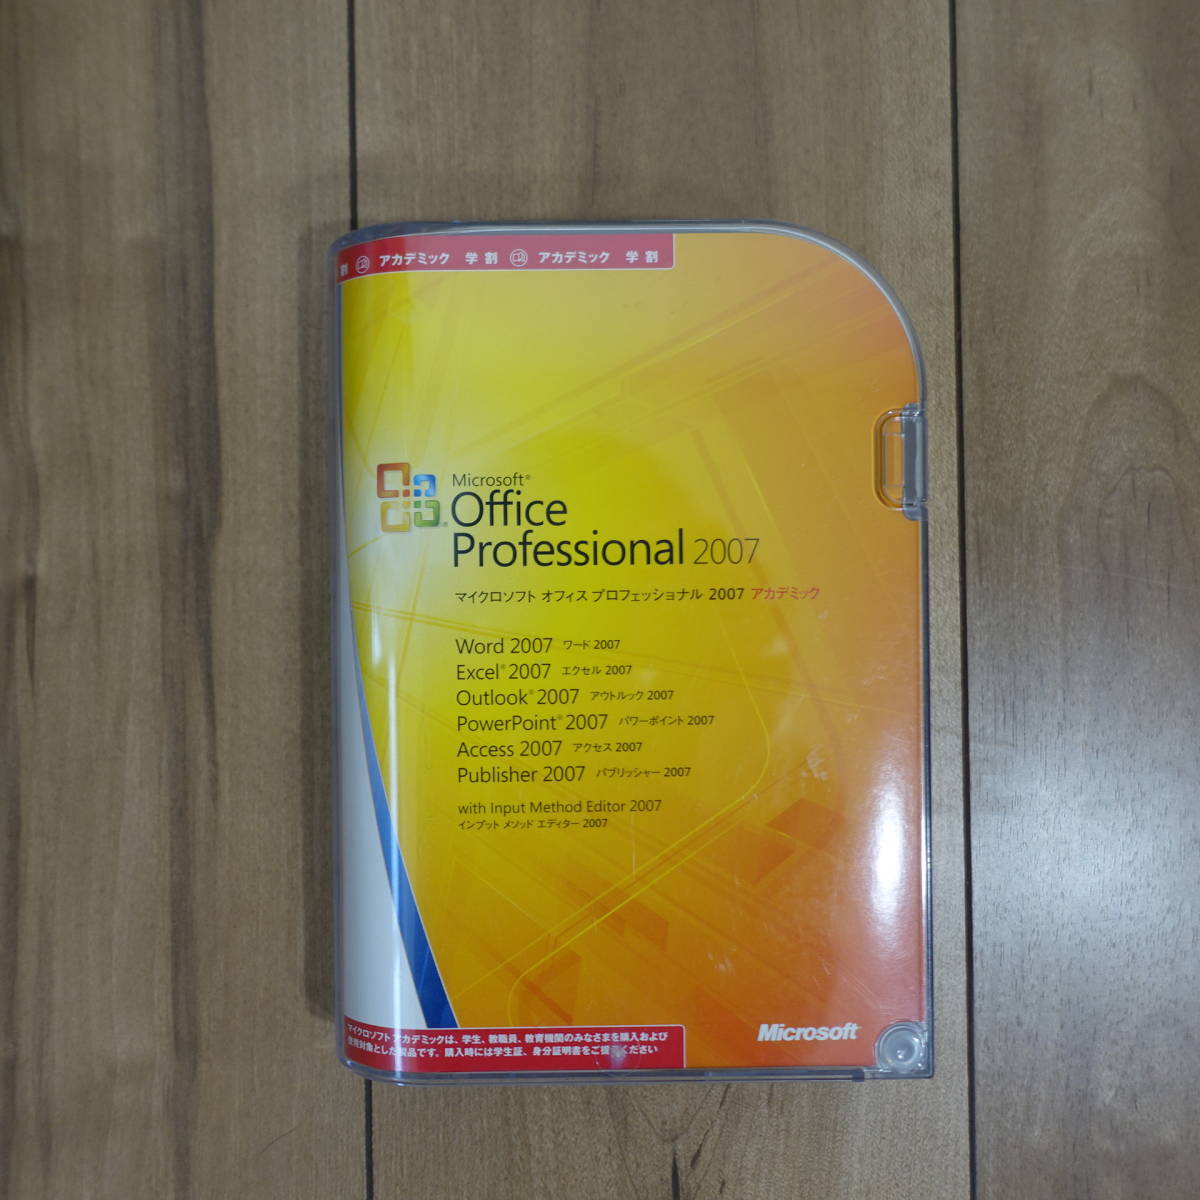 Microsoft Office Professional 2007 Word/Excel/Outlook/PowerPoint/Access/Publisher パッケージ版 通常製品版_画像5